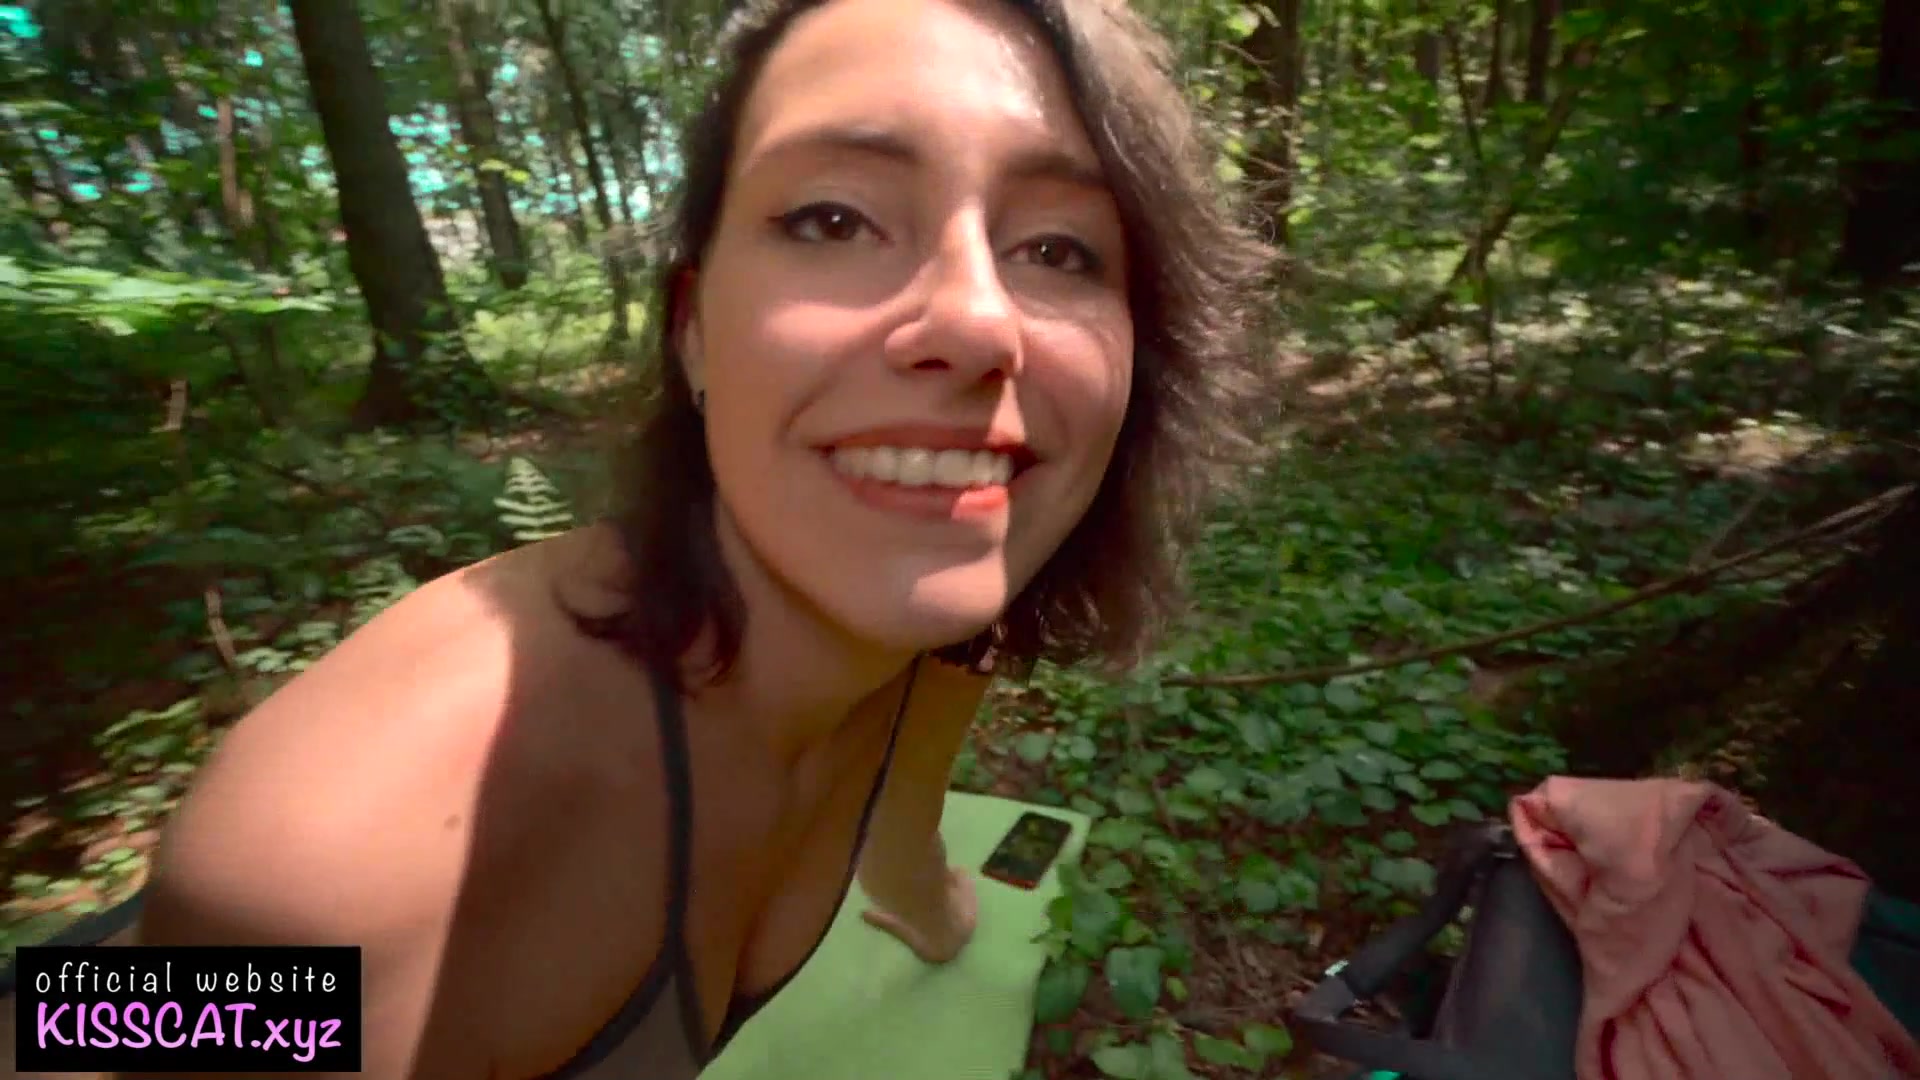 Sister Fuck In Forest - Fit sister fucks brother in public forest | FamilyPorn.tv